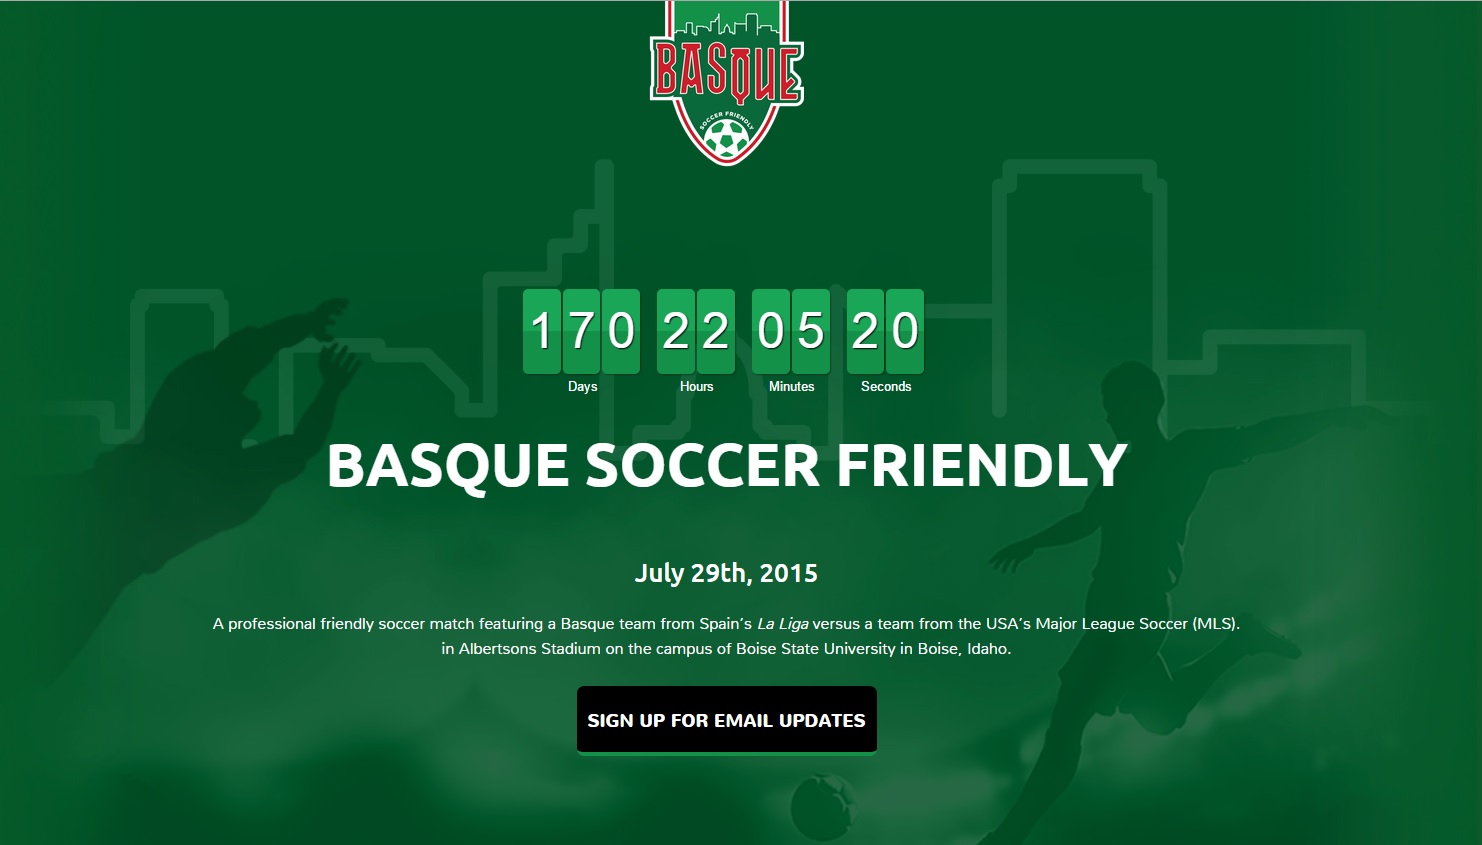 The Basque Soccer Friendly website can be visited in three languages: English, Basque, and Spanish (Image: Euskal Kultura)